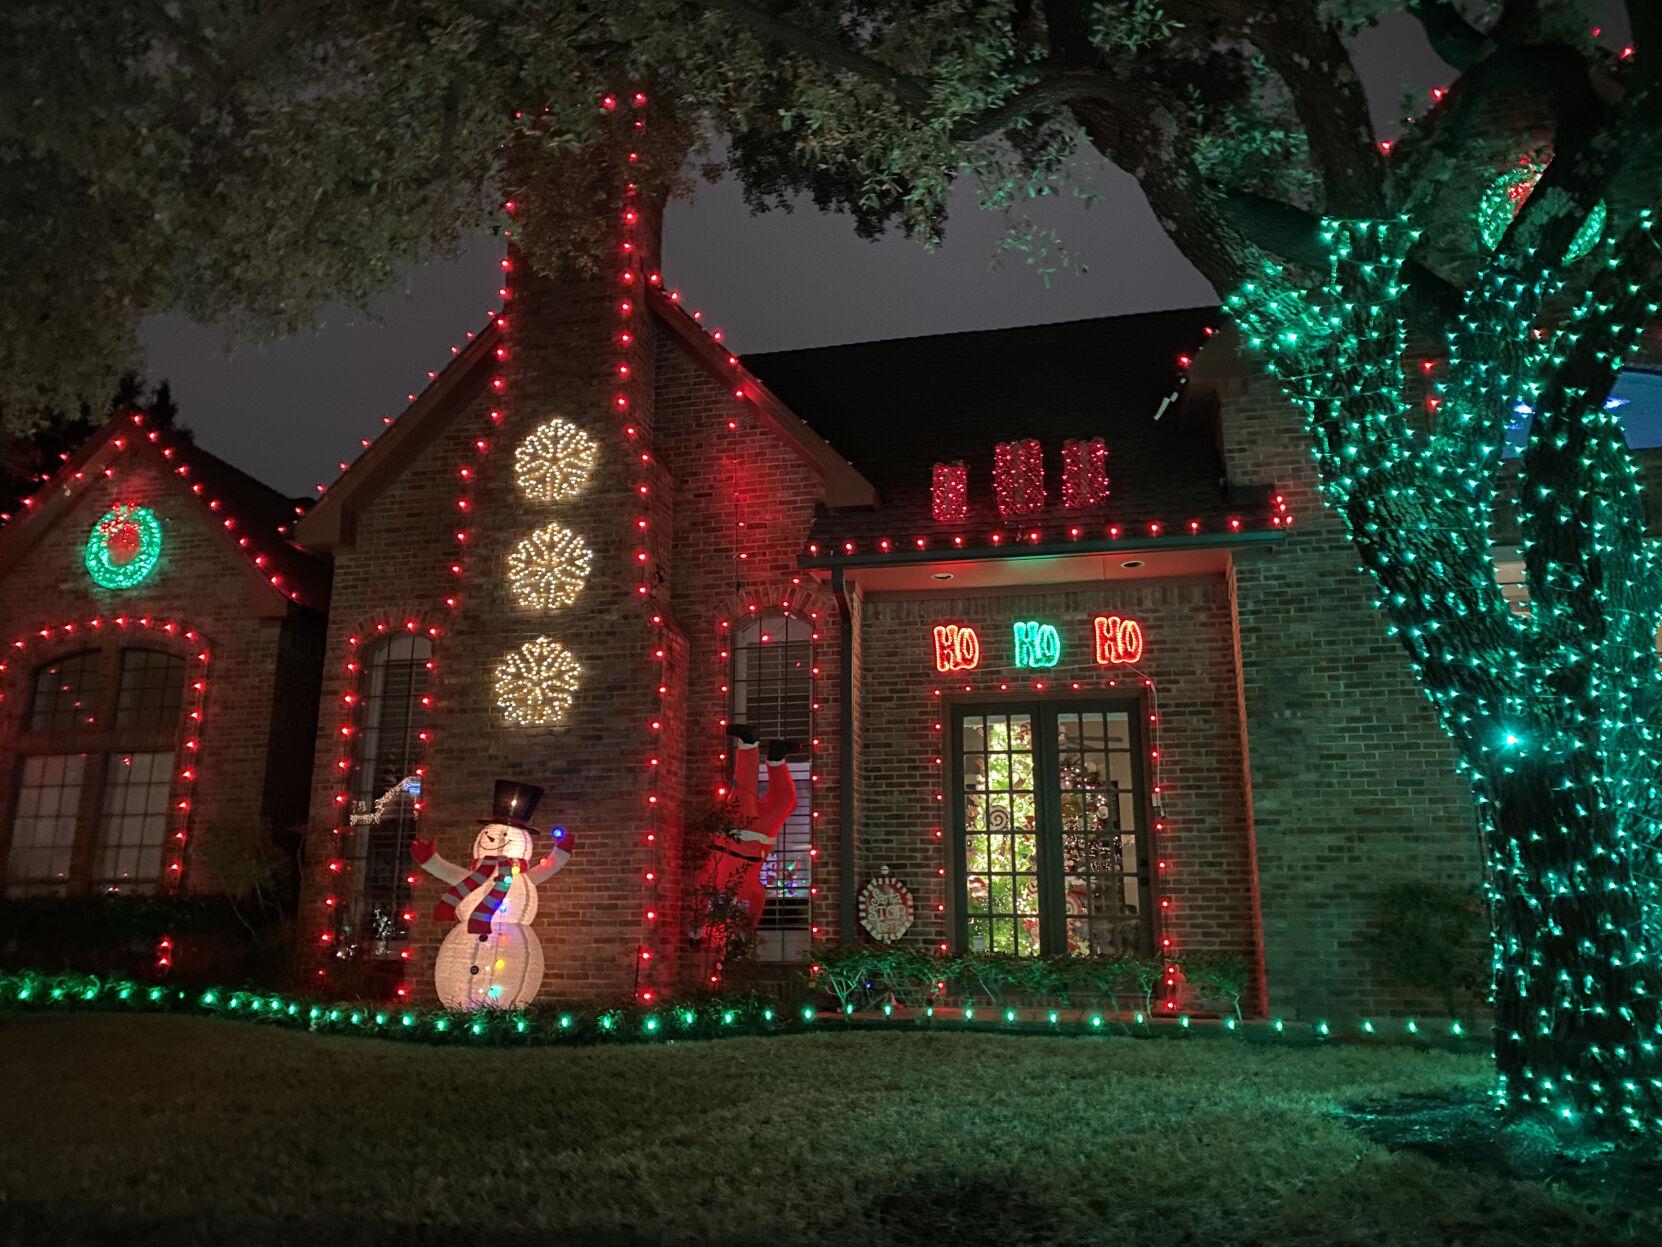 Check out the holiday lights in the Deerfield neighborhood in Plano